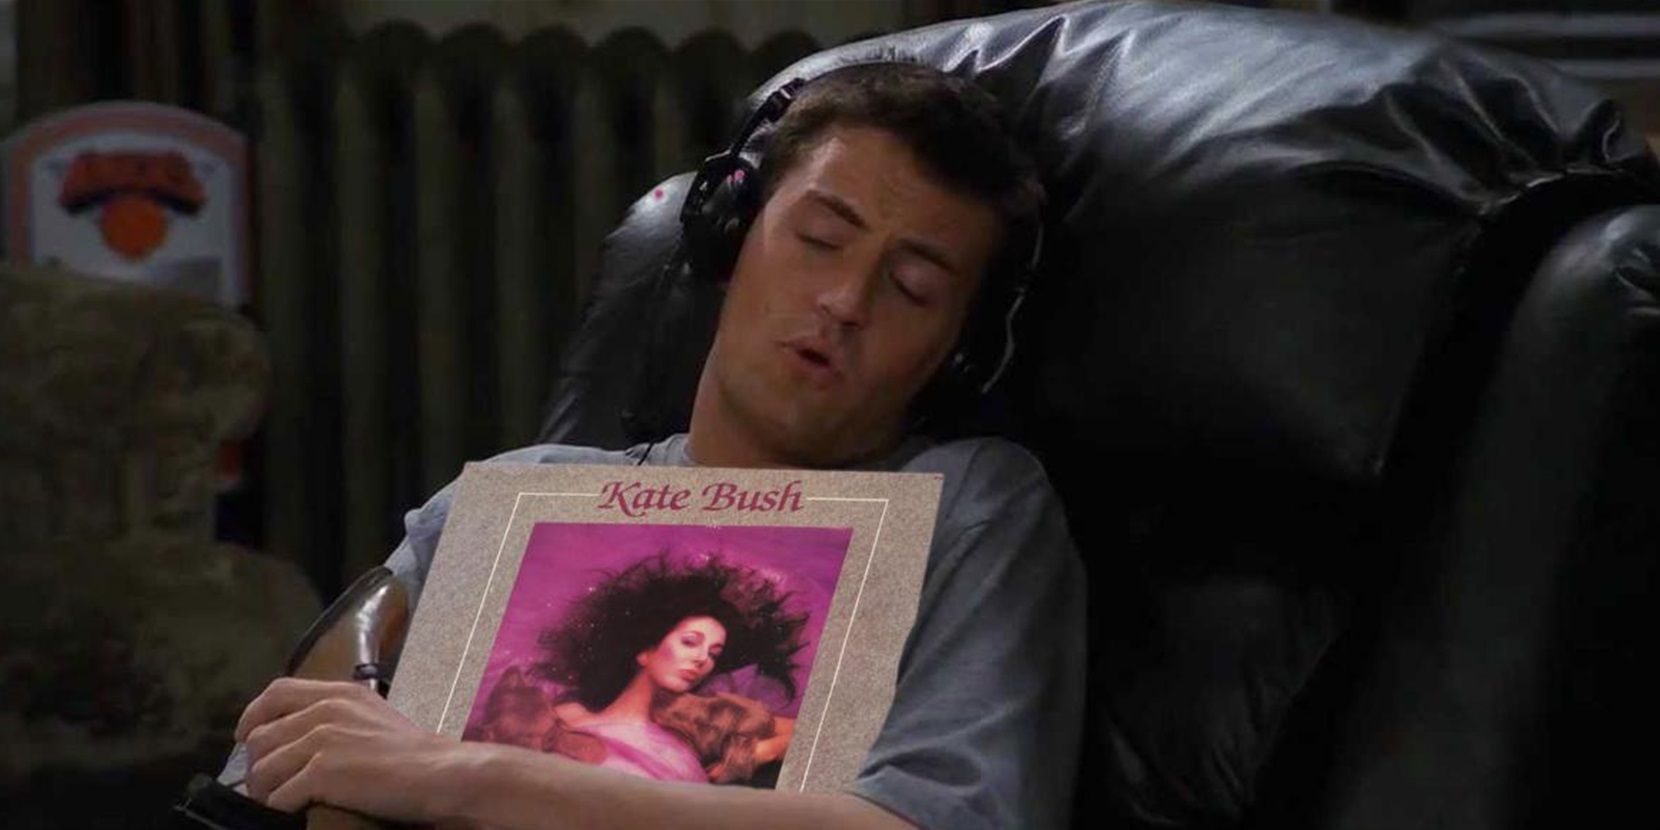 Chandler holding a Kate Bush record